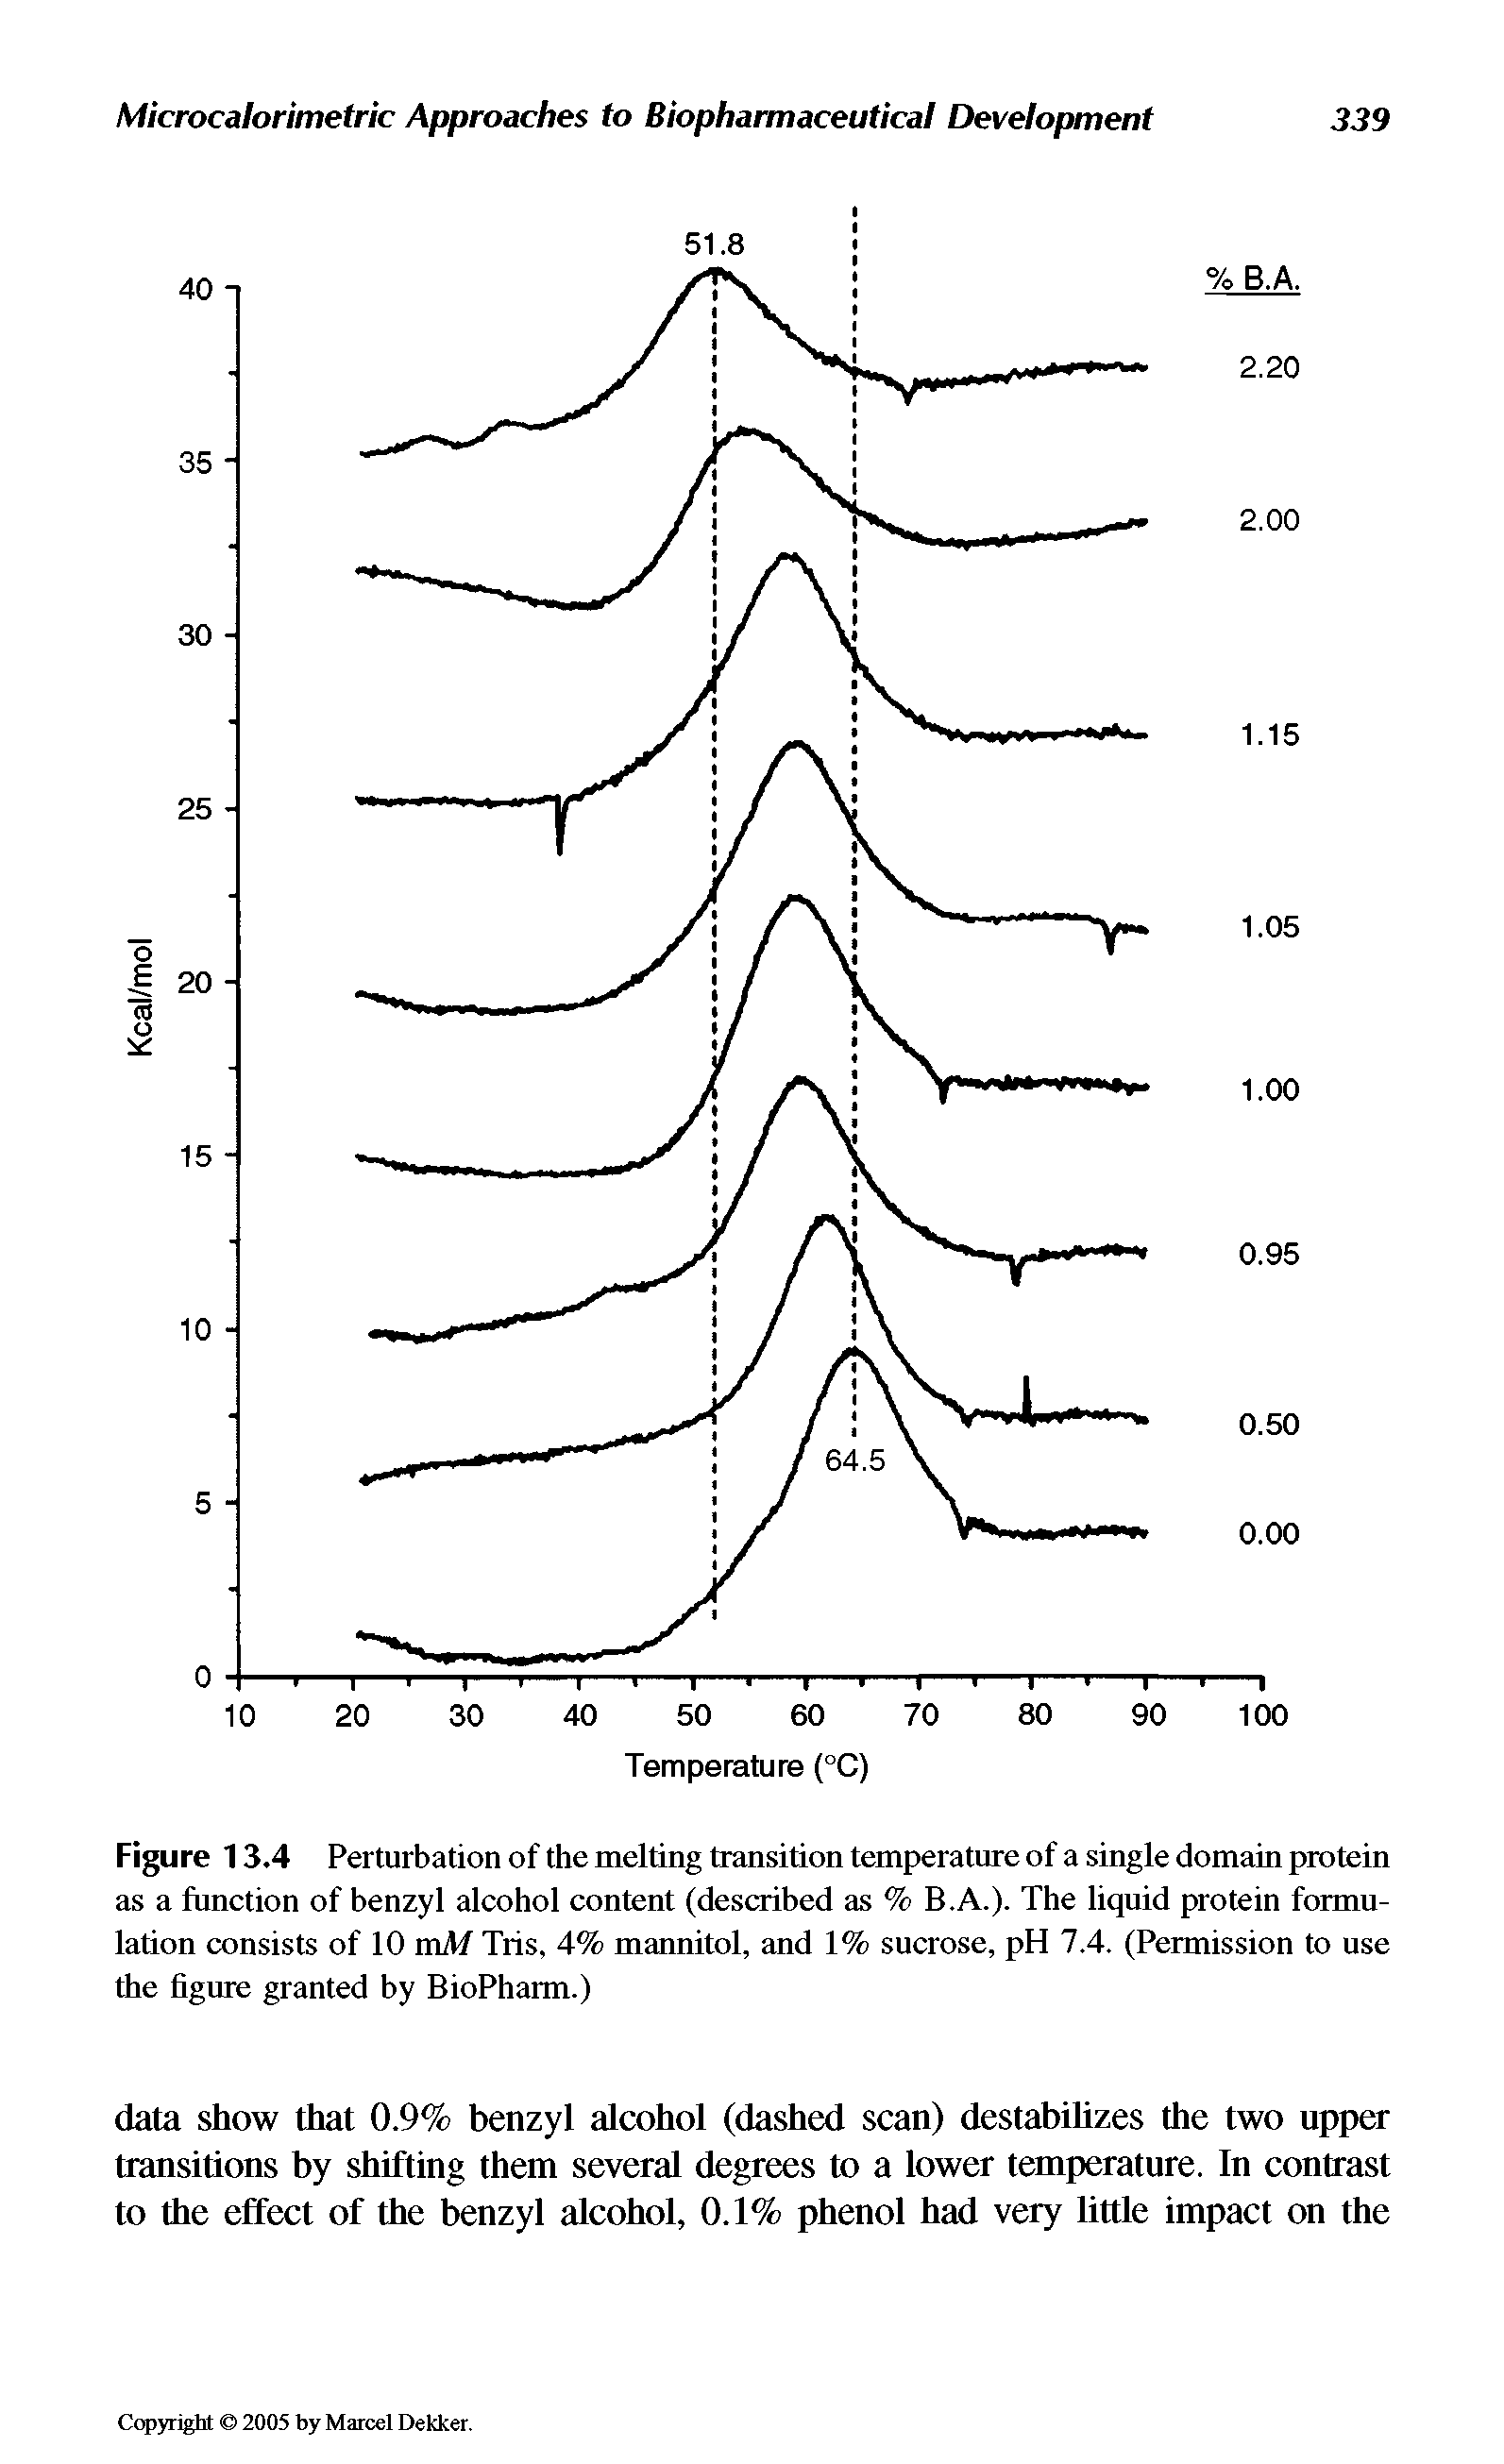 Figure 13.4 Perturbation of the melting transition temperature of a single domain protein as a function of benzyl alcohol content (described as % B.A.). The liquid protein formulation consists of 10 mM Tris, 4% mannitol, and 1% sucrose, pH 7.4. (Permission to use the figure granted by BioPharm.)...